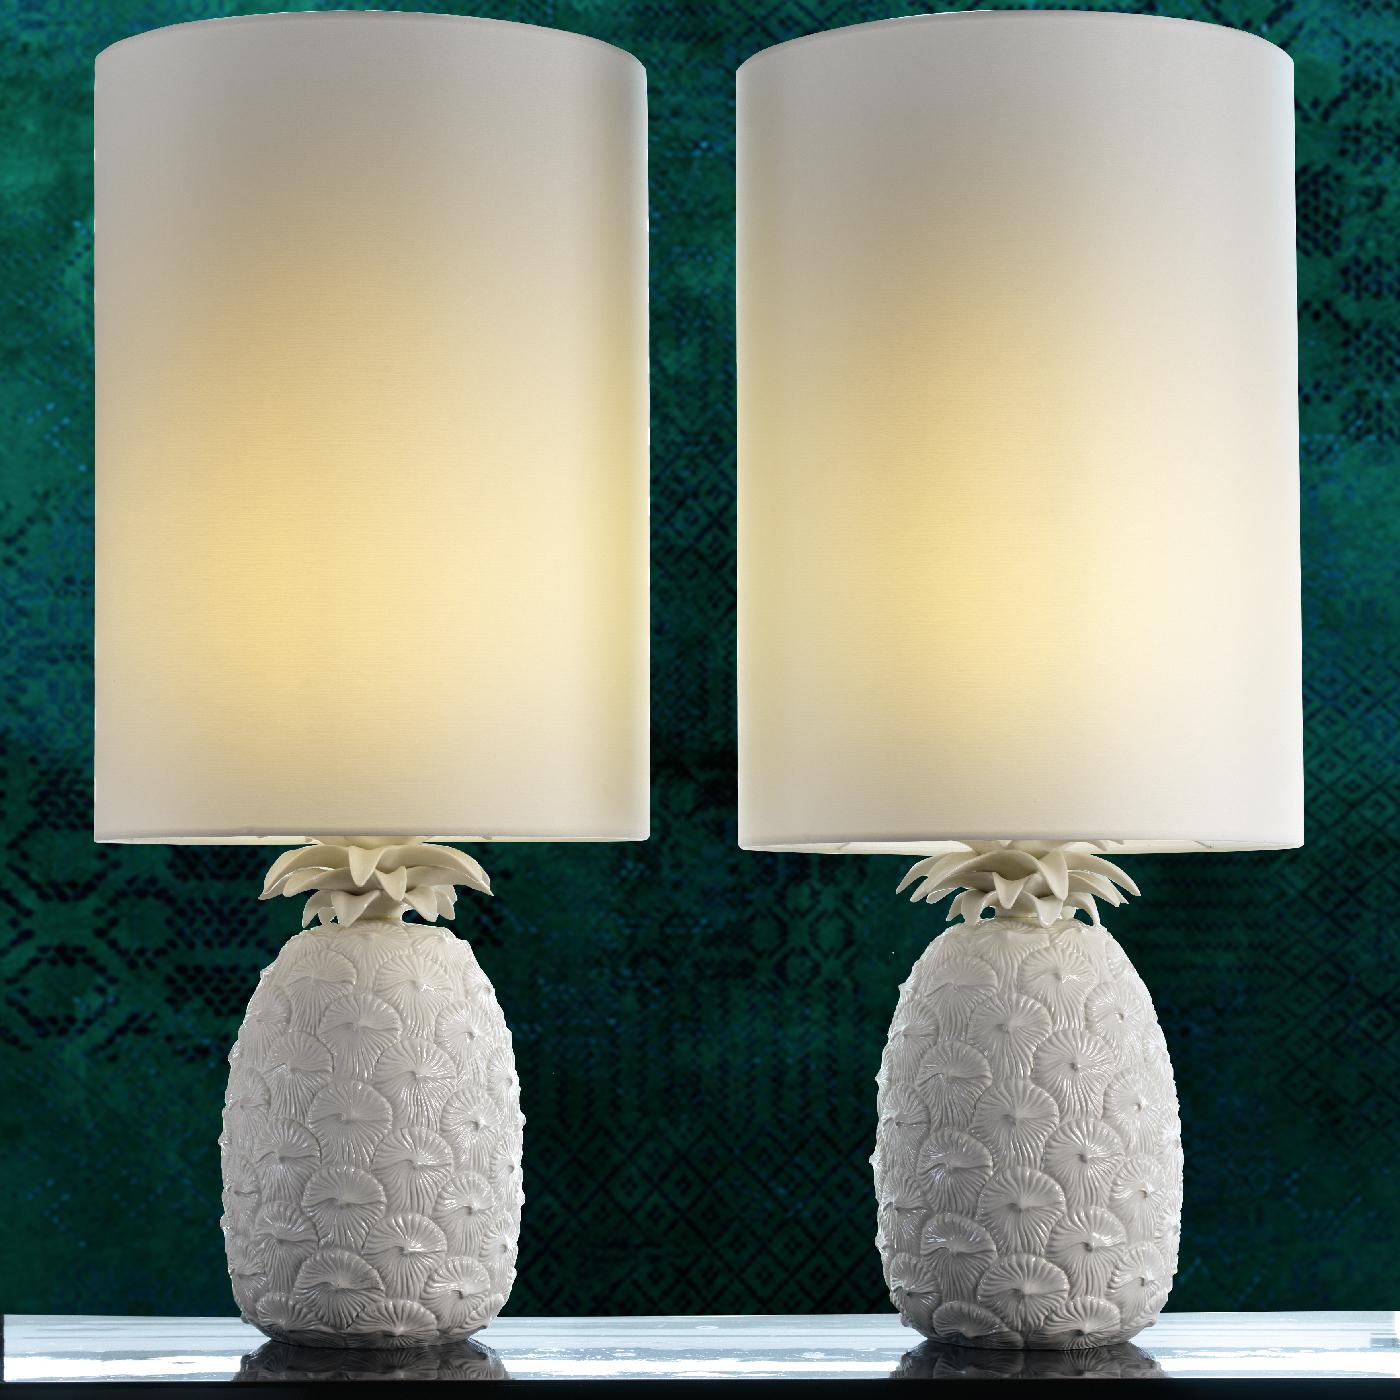 This unconventional table lamp strikes with the minute details inlaid on its porcelain base. Its structure includes a bold, cylindrical lampshade that hosts a single lightbulb supported by a porcelain base shaped like a pineapple depicted in